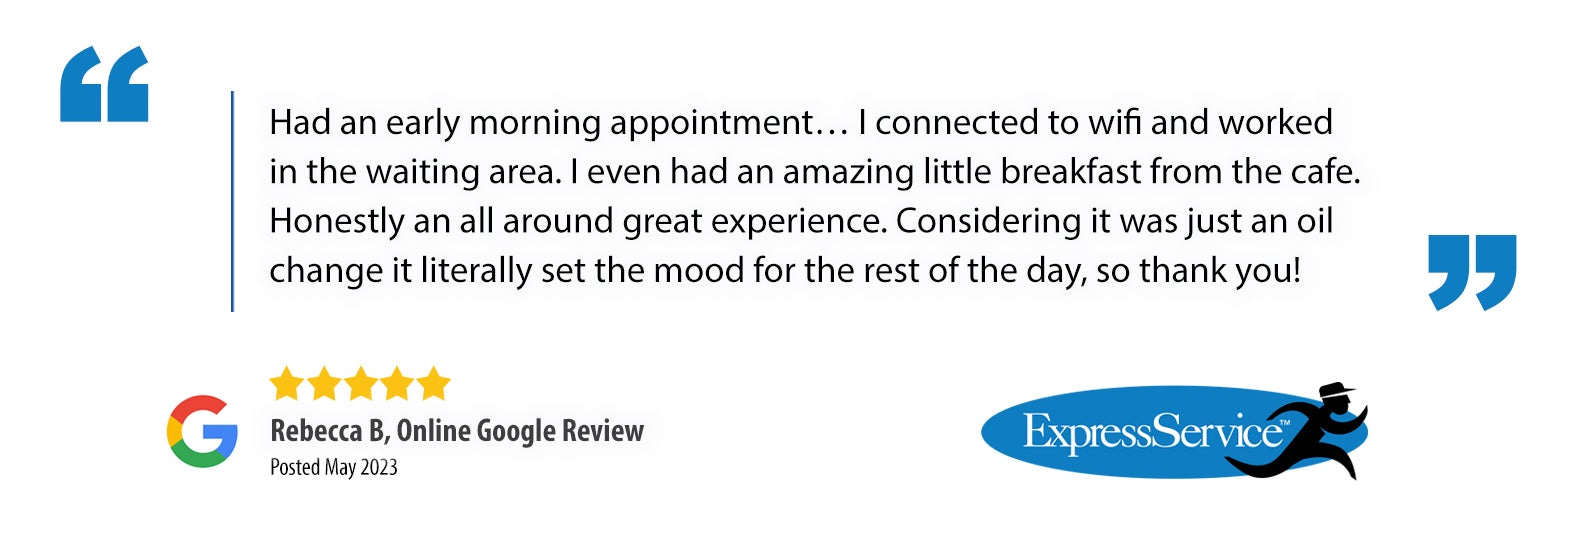 Review for Express Service from Rebecca B.